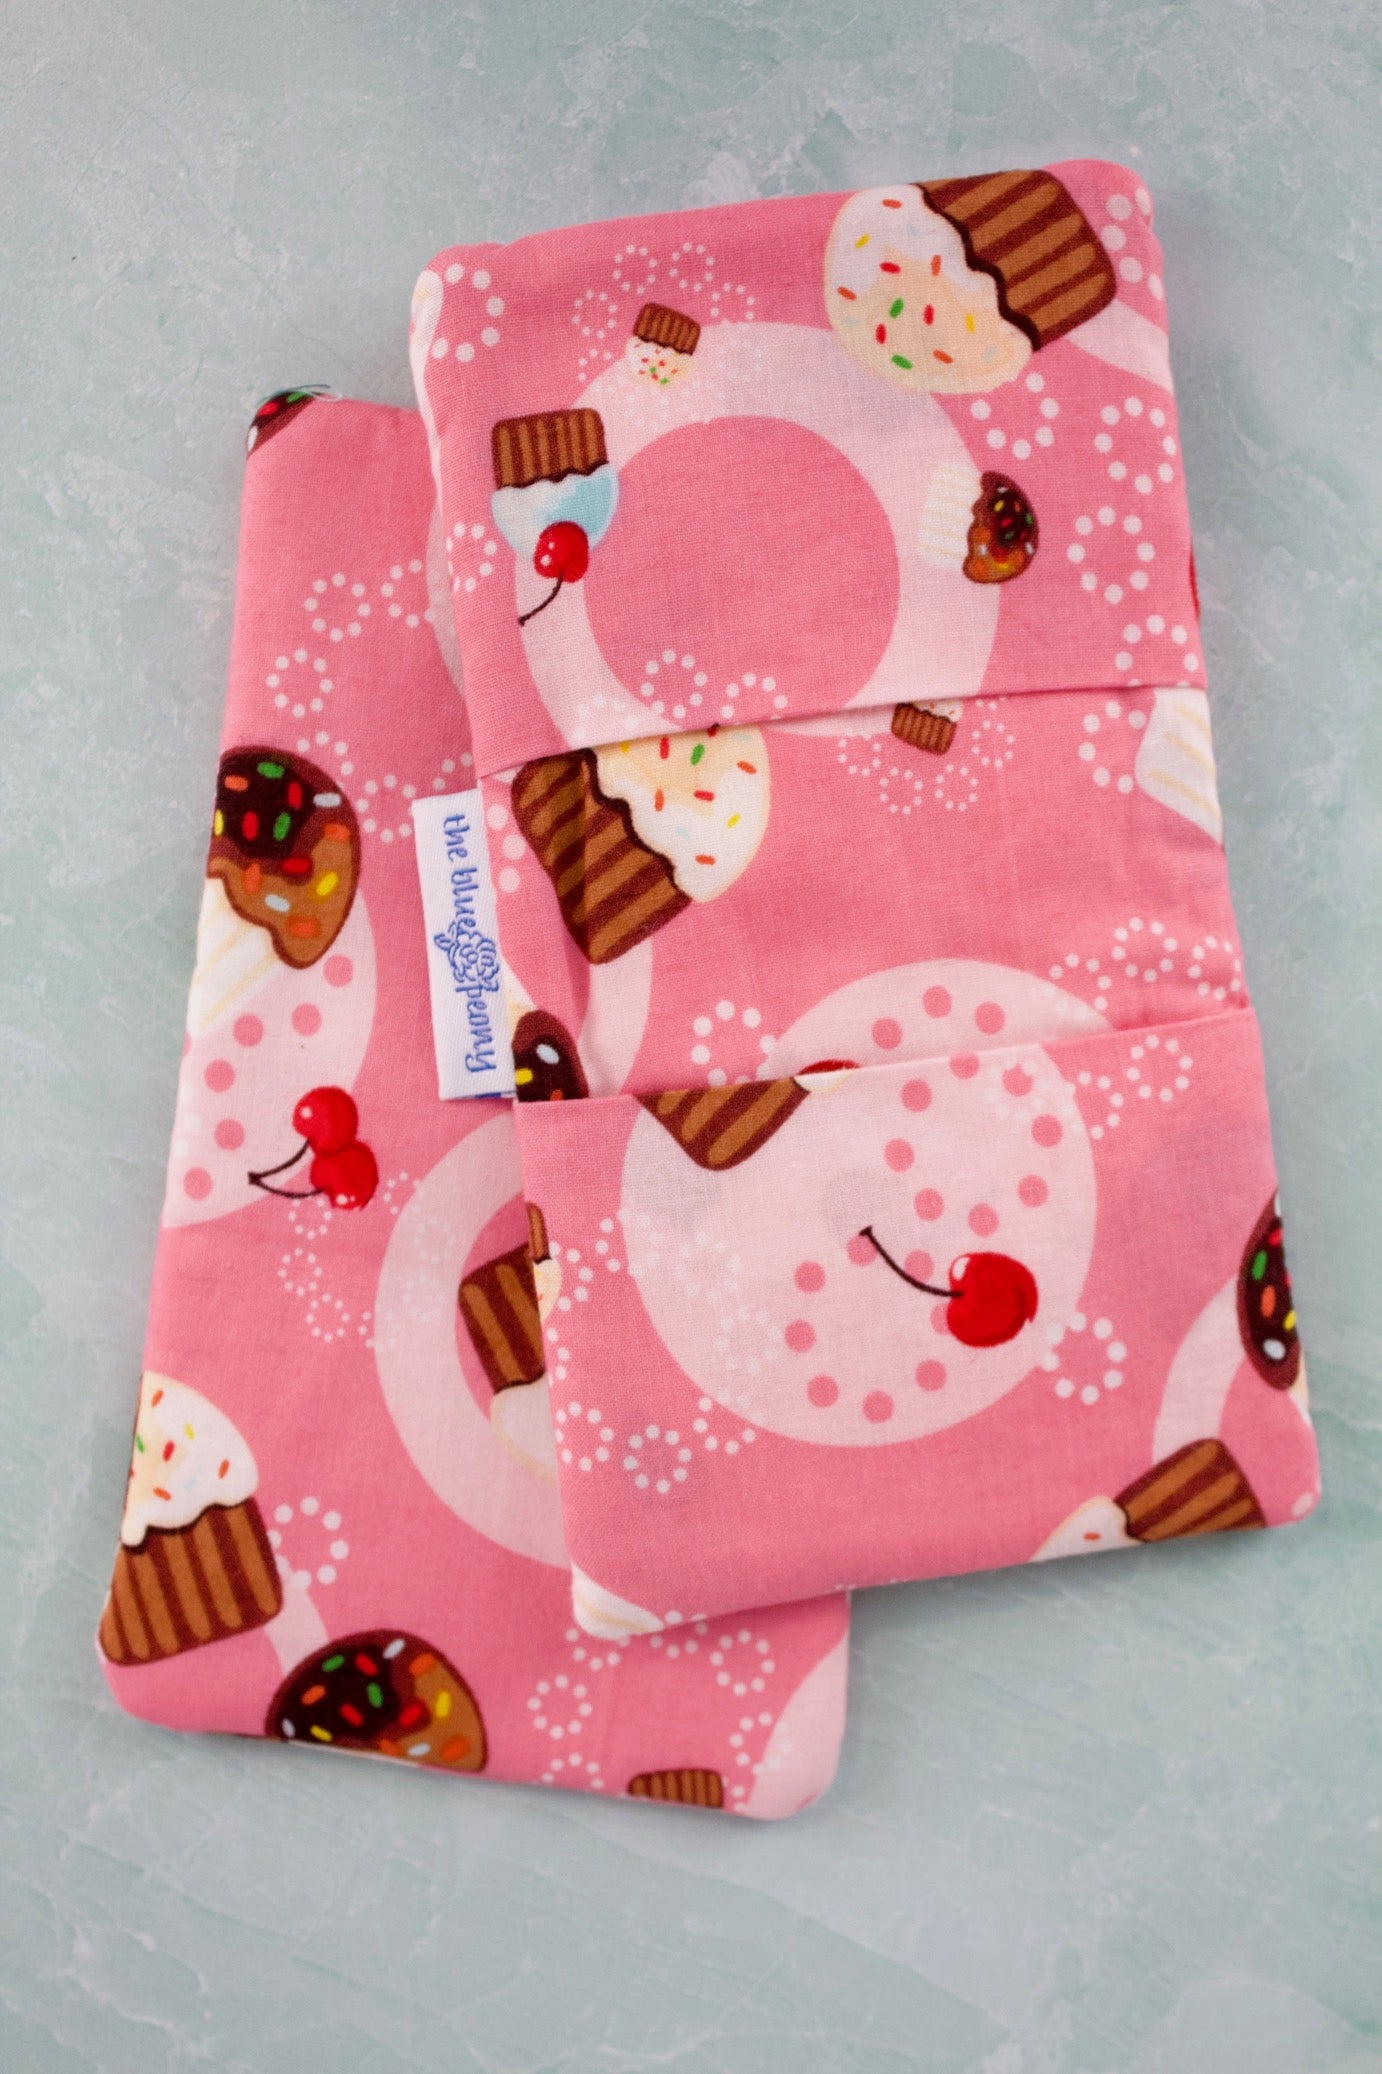 Cherry Cupcake Mini Potholders-The Blue Peony-Category_Pot Holder,Color_Pink,Color_Red,Department_Kitchen,Pattern_Polka Dot,Size_Mini (Rectangle),Theme_Food